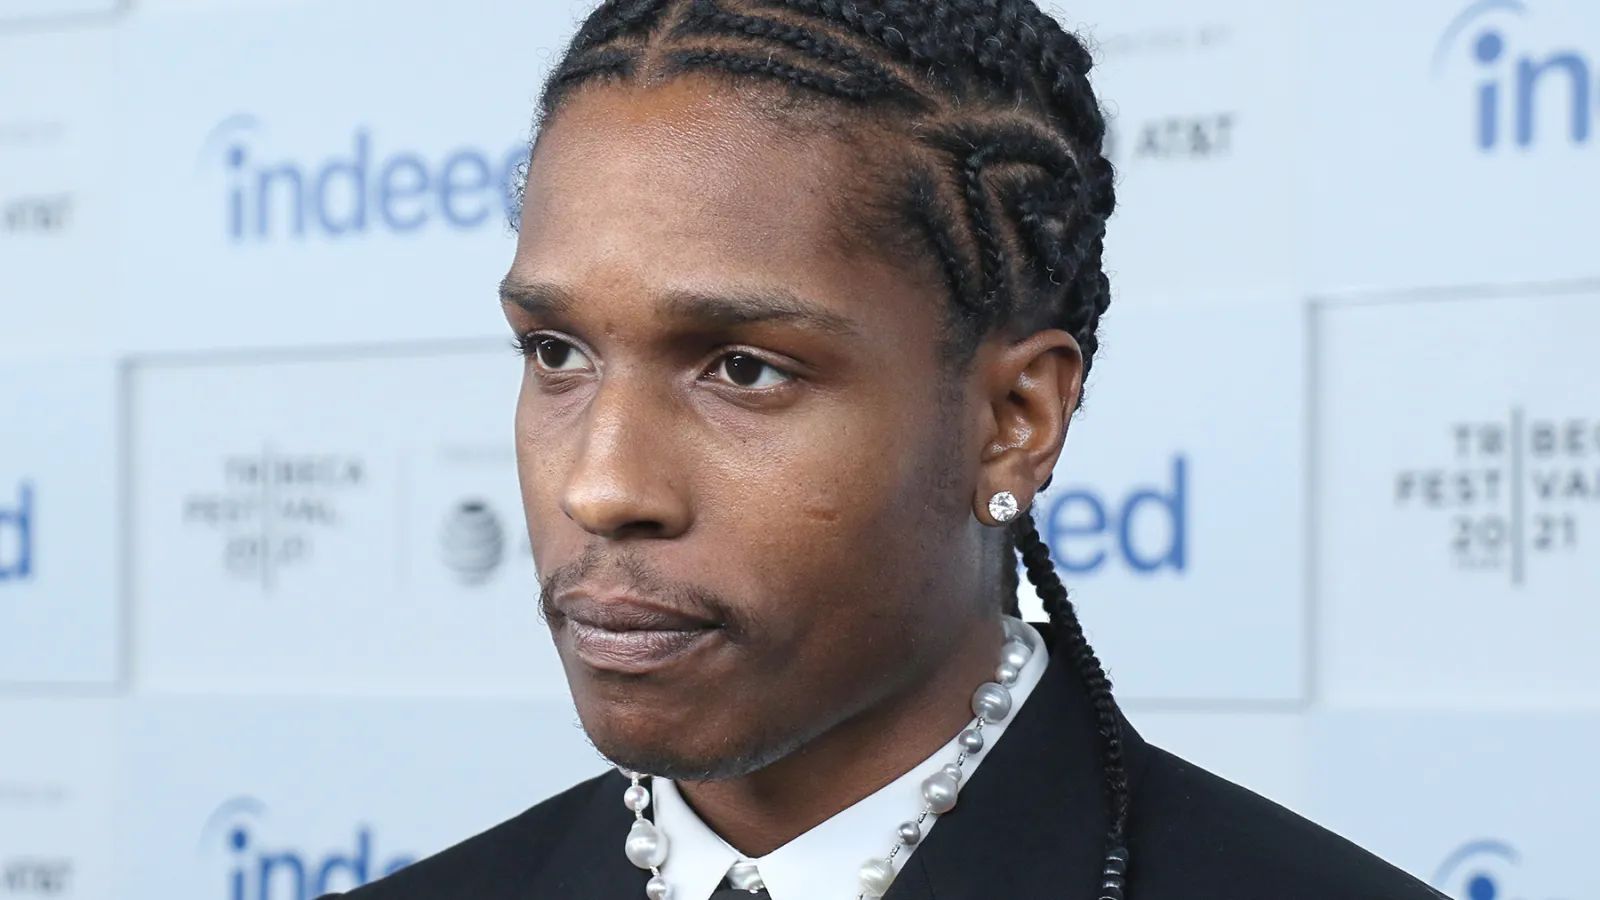 A$AP Rocky Accused Of Threatening To Kill Former Crew Member In Assault Case Testimony